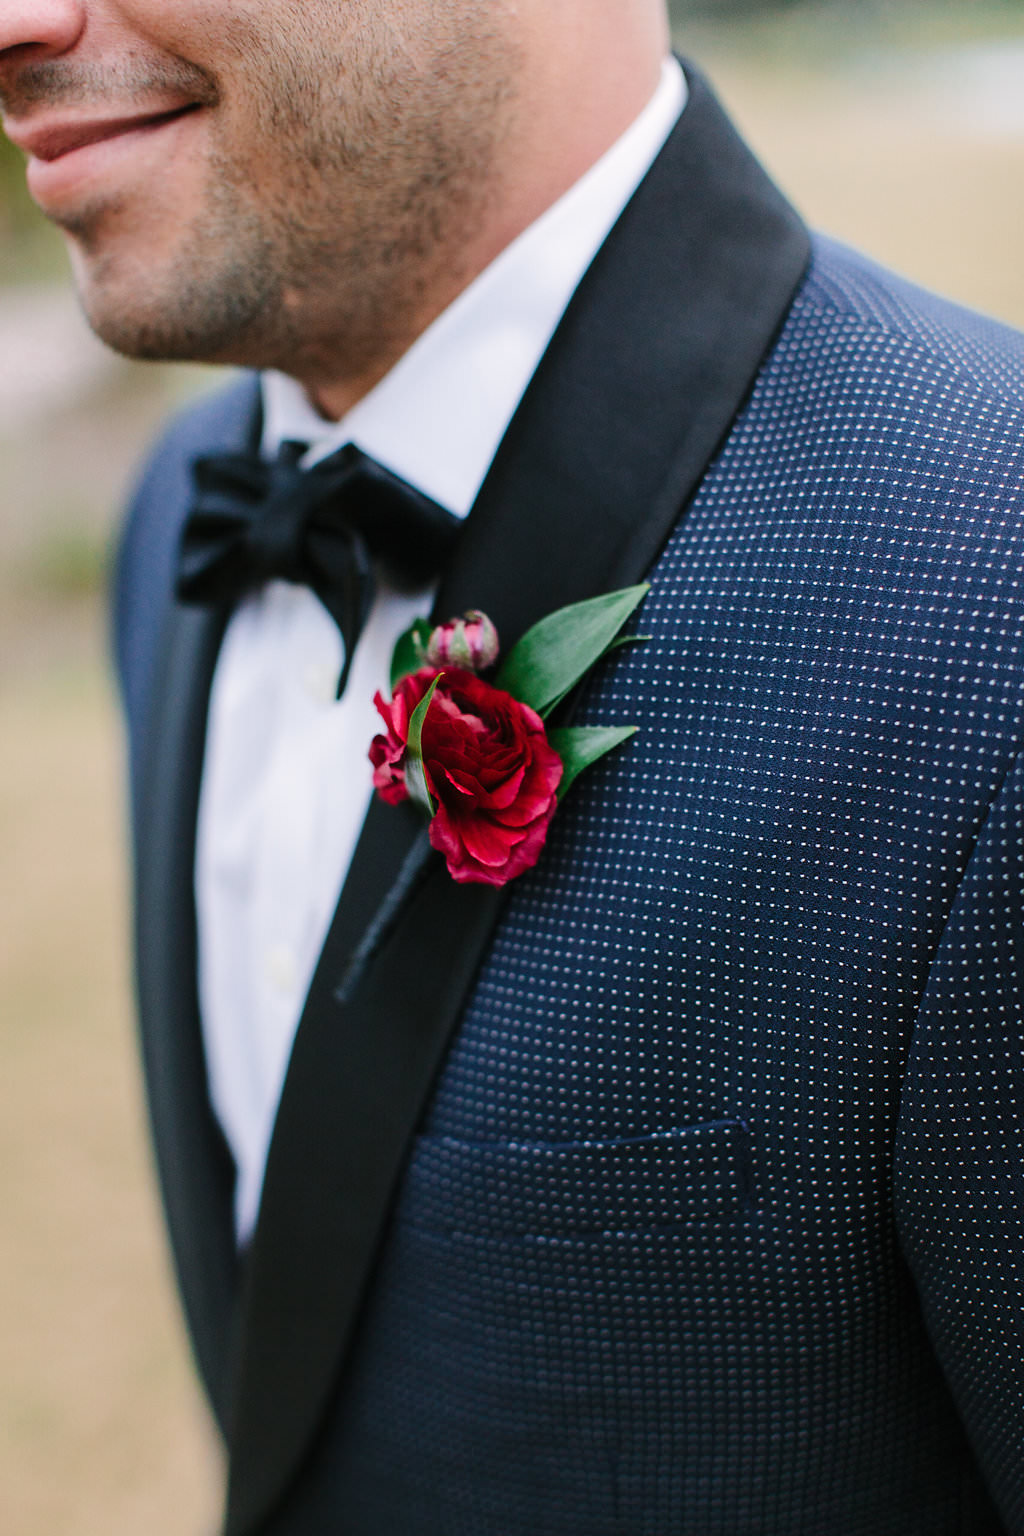 Outdoor Groom Portrait in Navy and White Dotted Suit, with Wine Red Rose with Greenery Boutonniere